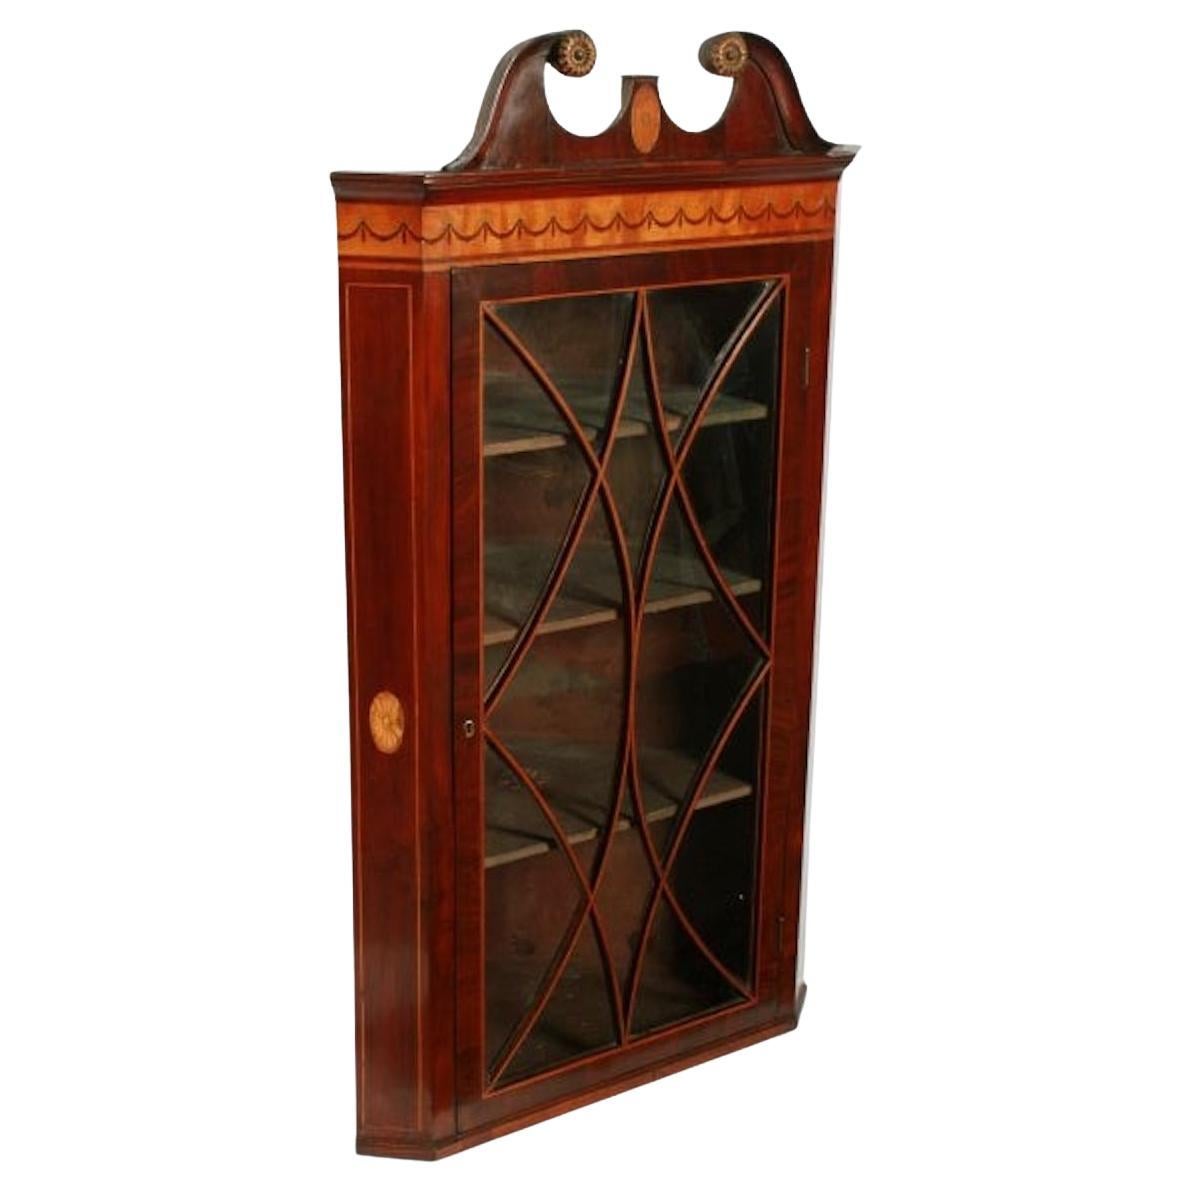 Georgian mahogany corner cabinet

A late 18th to early 19th century Georgian mahogany glazed corner cabinet.

The cabinet has a single door with twelve panes of glass and swept glazing bars or astragals that have box wood line inlay in the